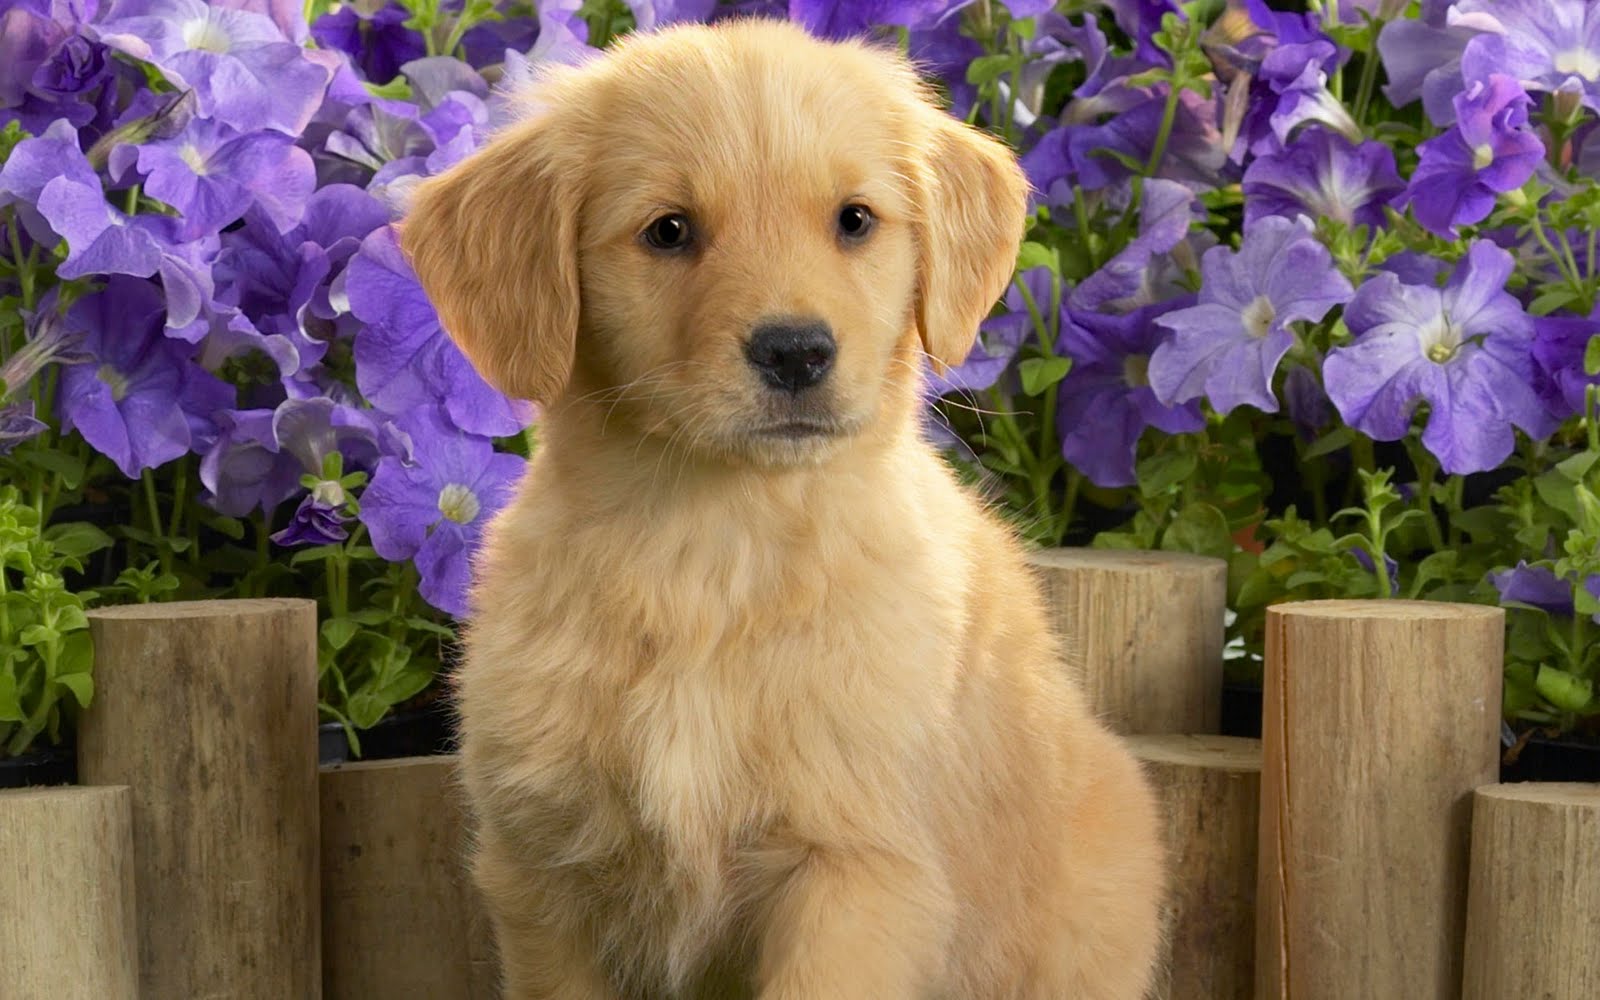 Cute Golden Retriever puppy and flowers photo and wallpaper Beautiful